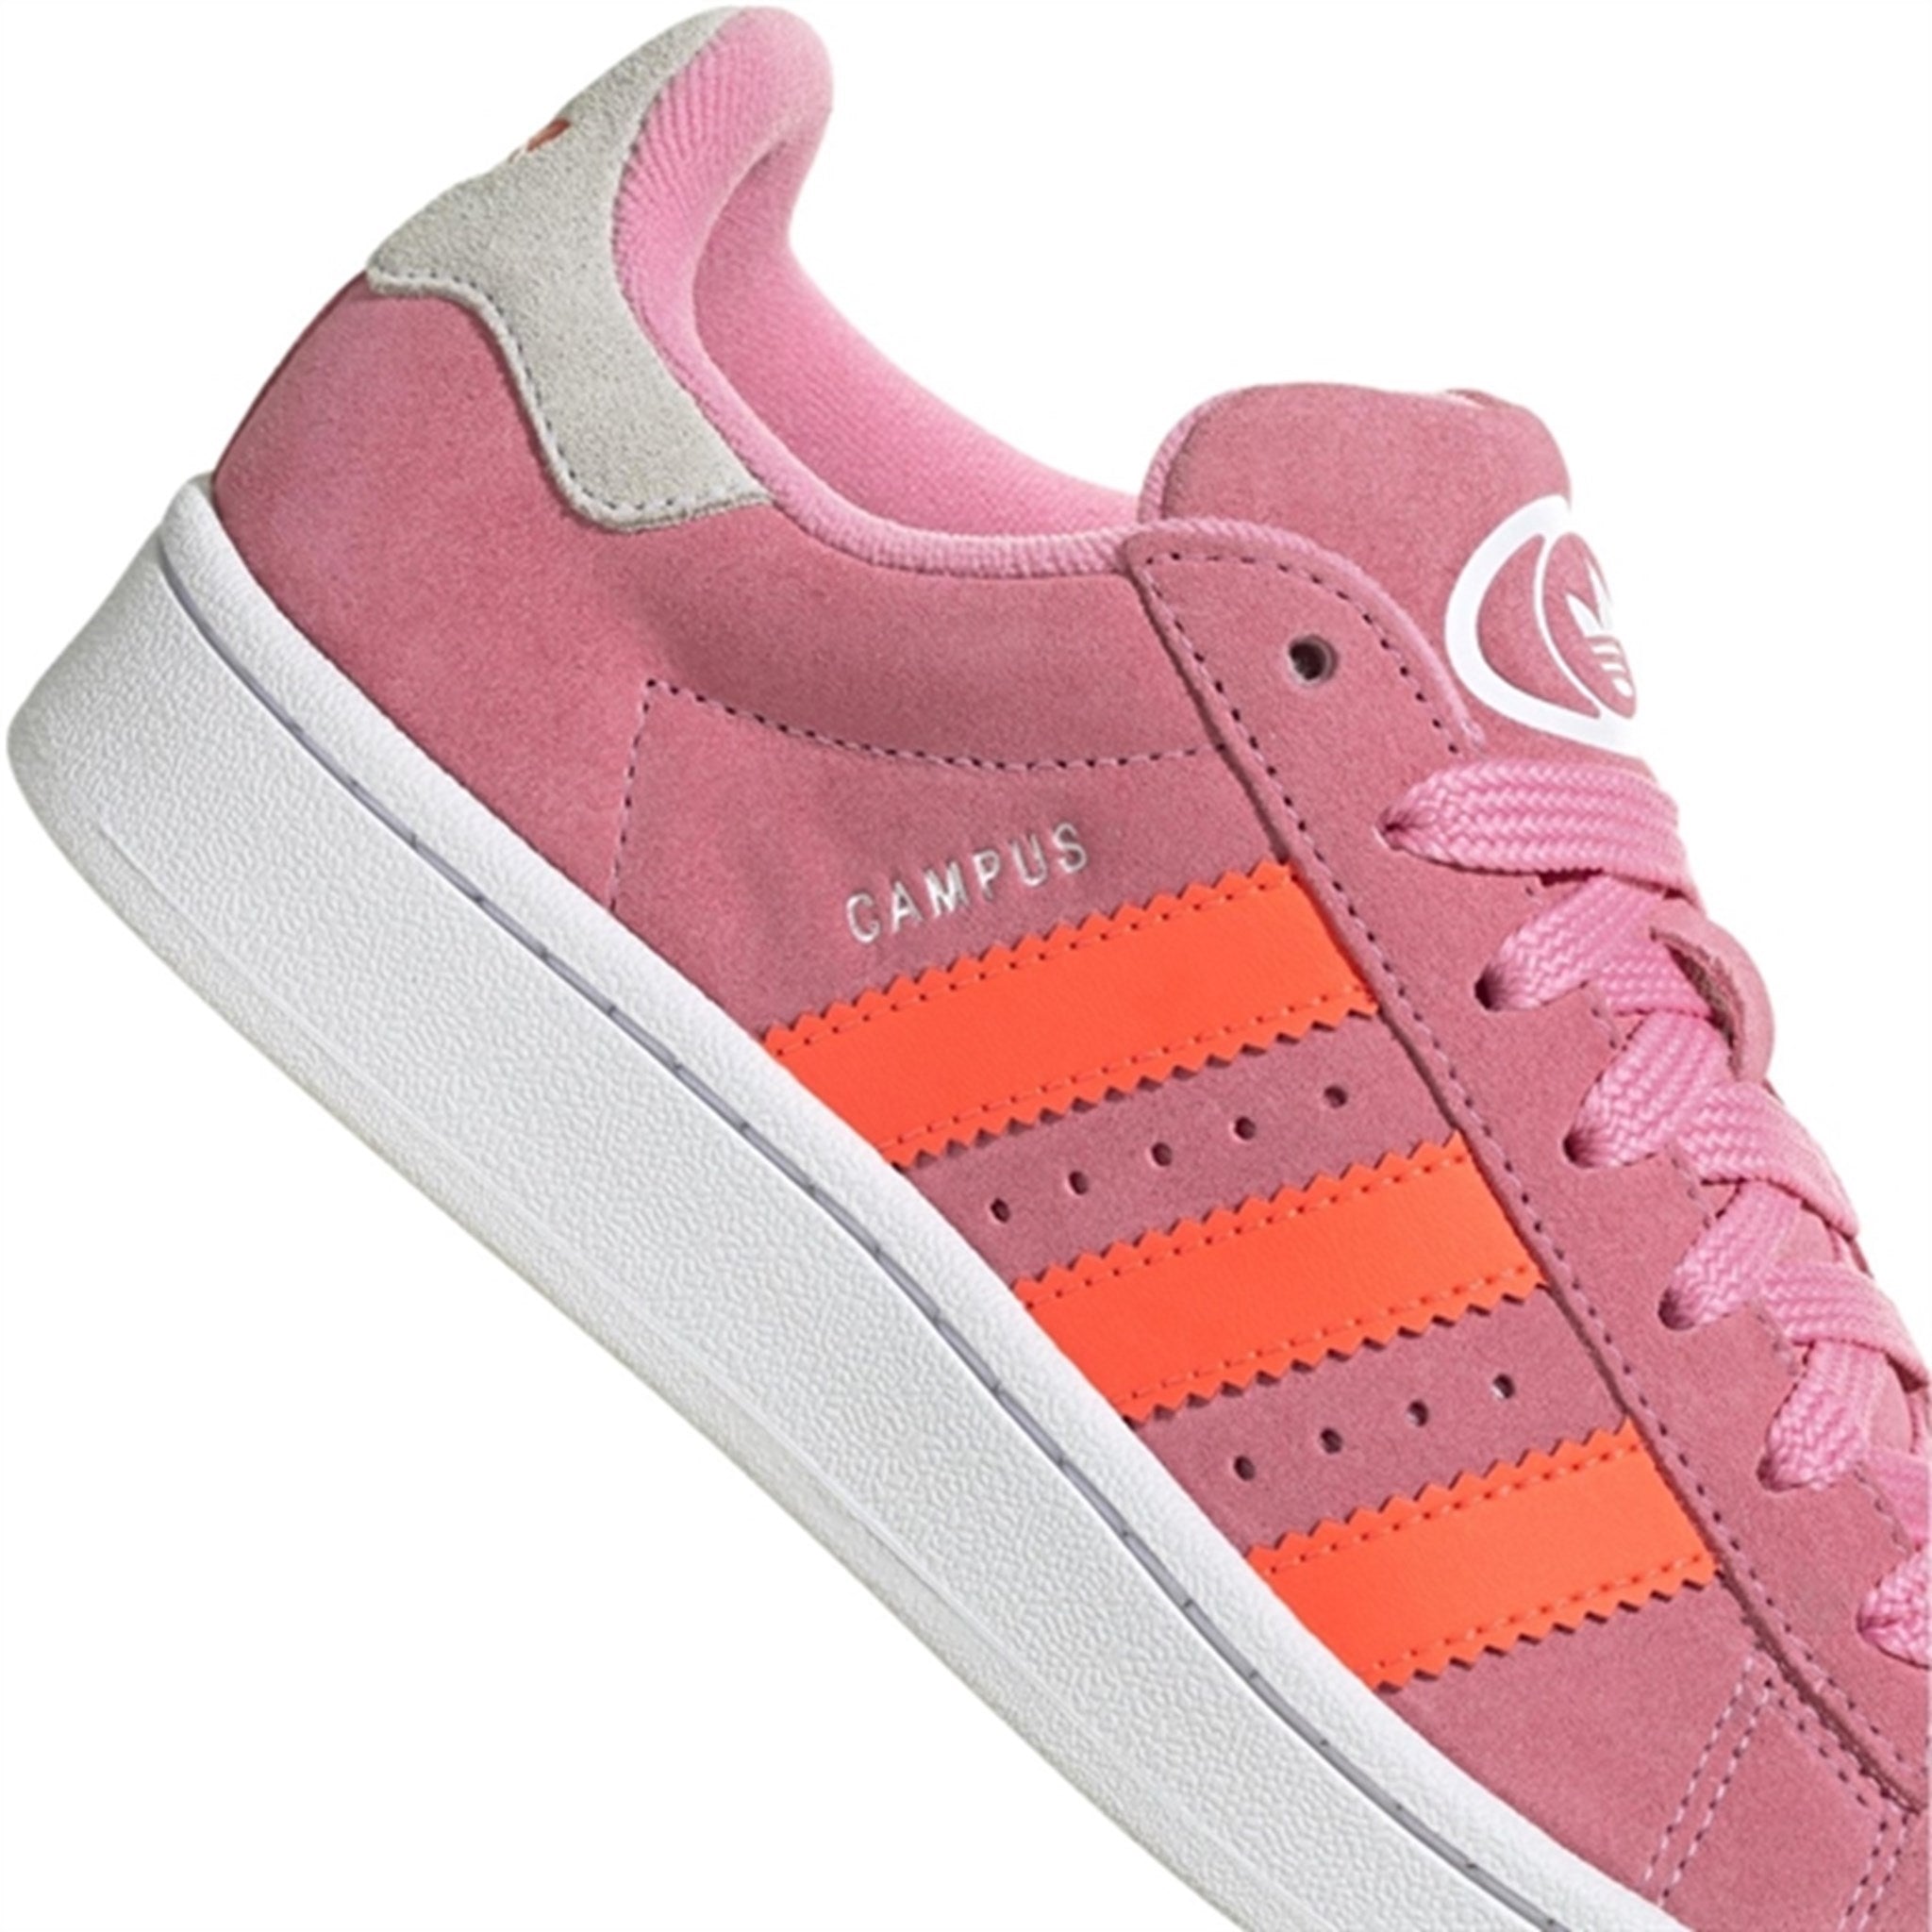 adidas Originals CAMPUS 00s J Sneakers Bliss Pink / Solar Red / Cloud White 5